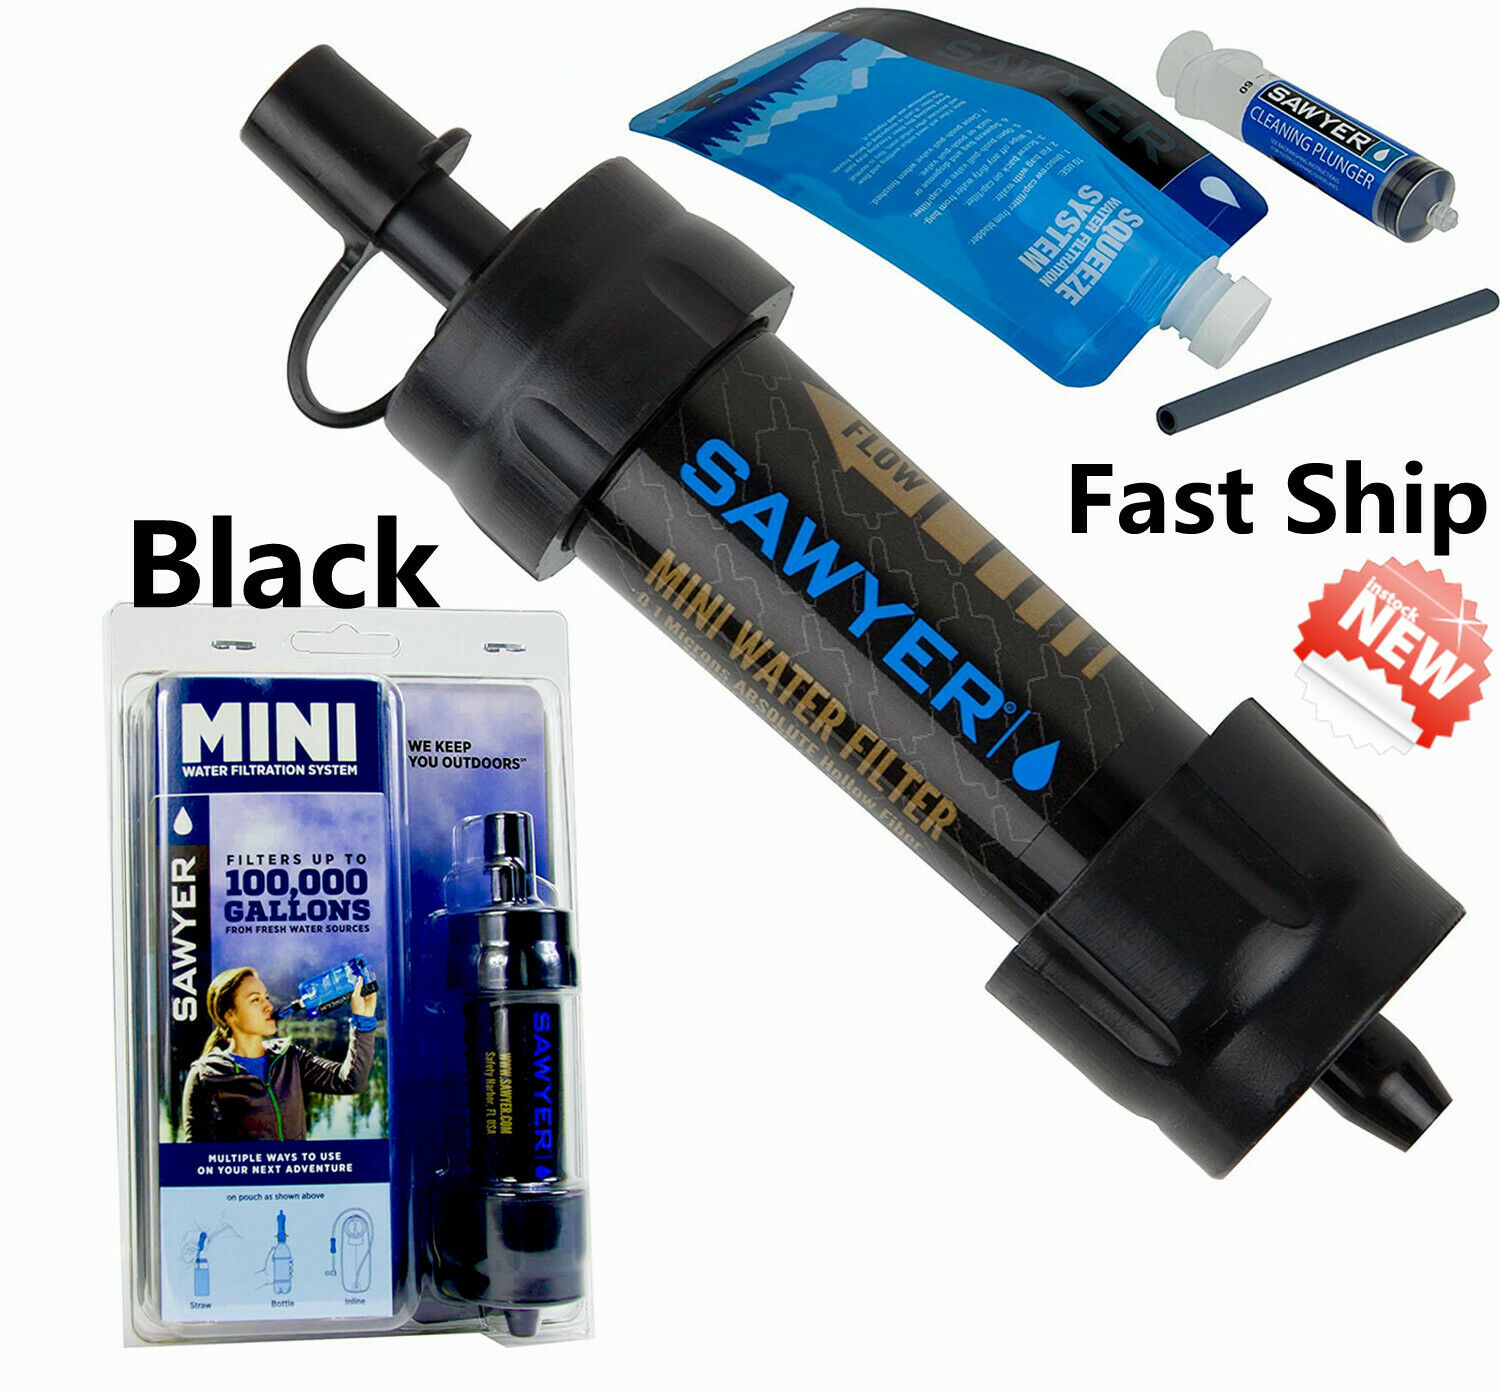 NEW Sawyer Products MINI Water Filter Filtration System Portable Black Sp105